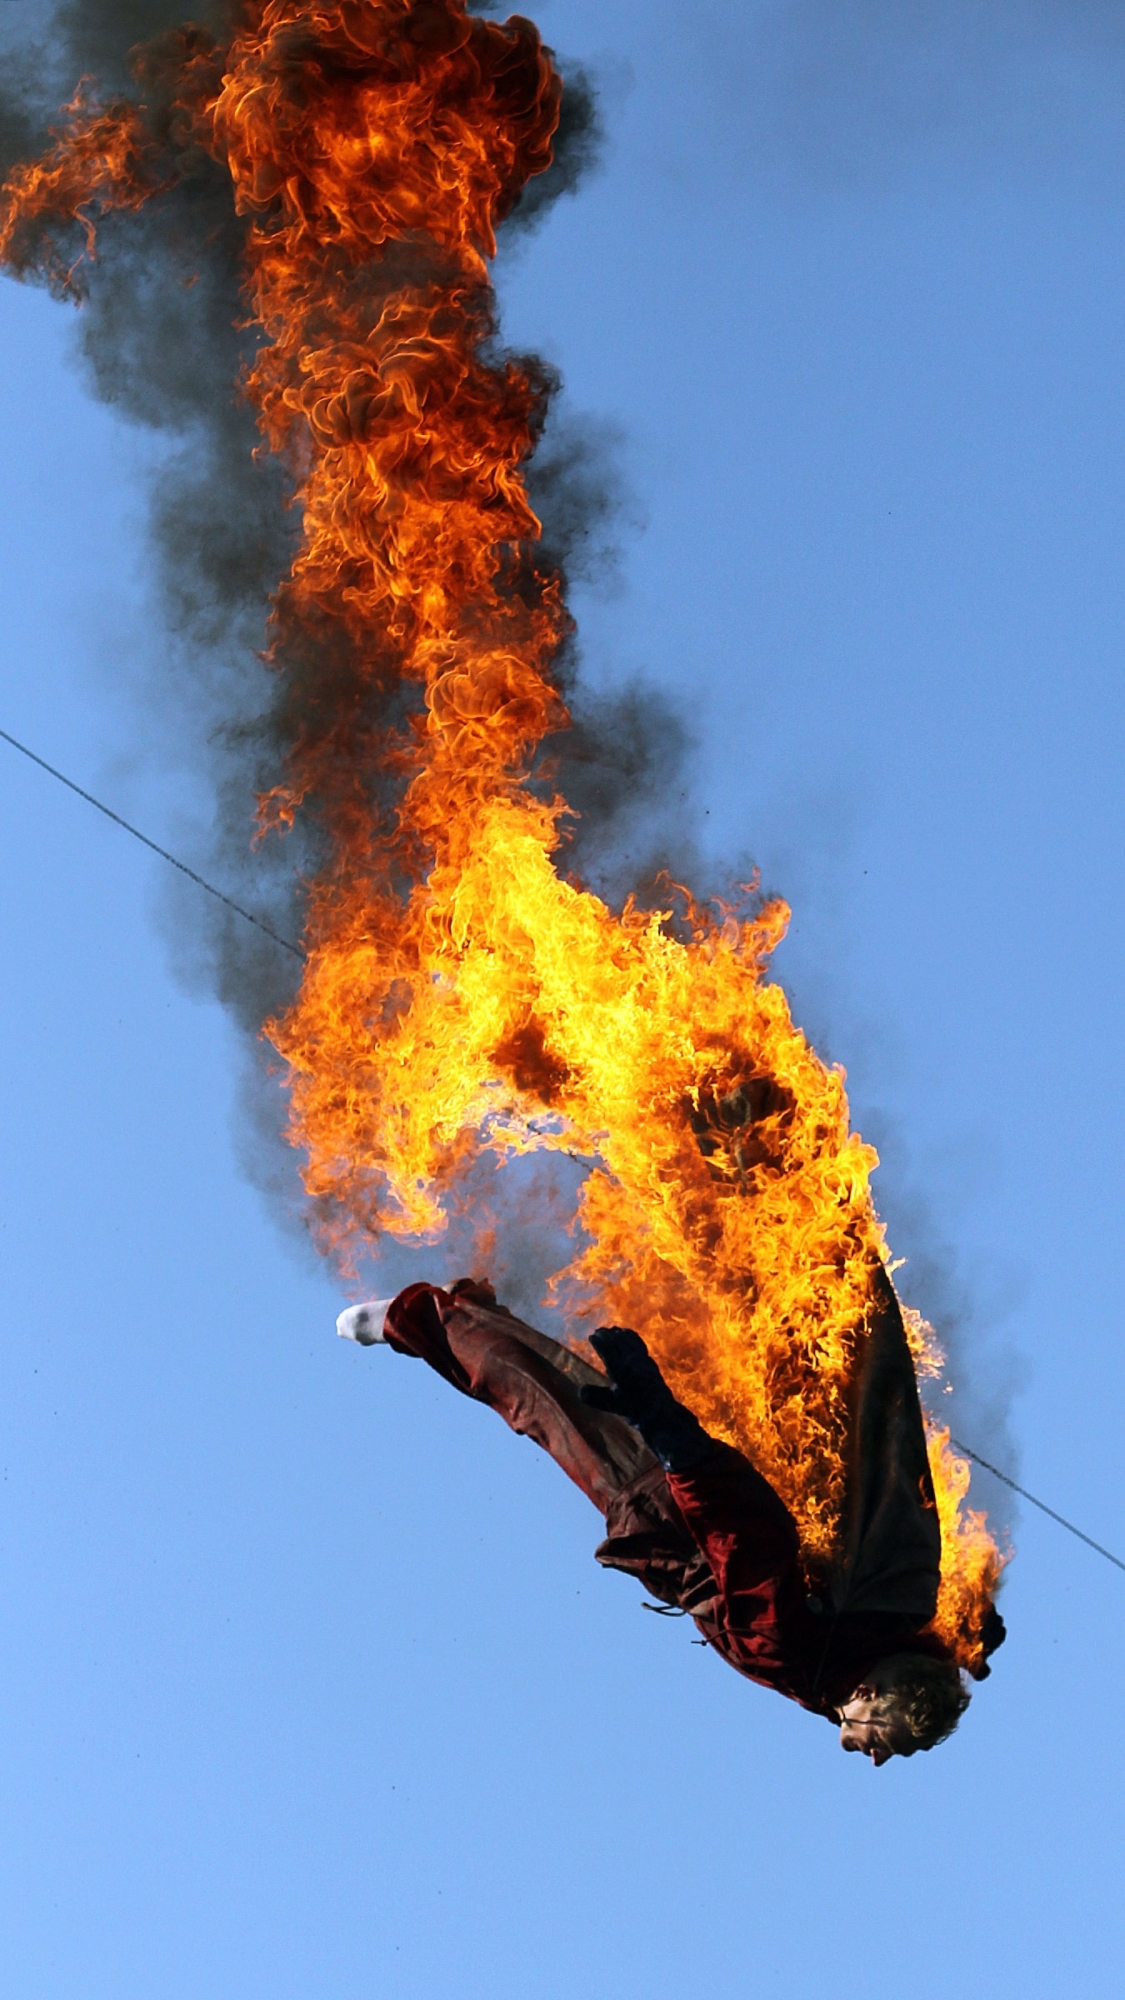 High diver Manuel Mendes, lights his body siut on fire to start the show Tuesday August 26, 2014 at the Great Allentown Fair.

//////